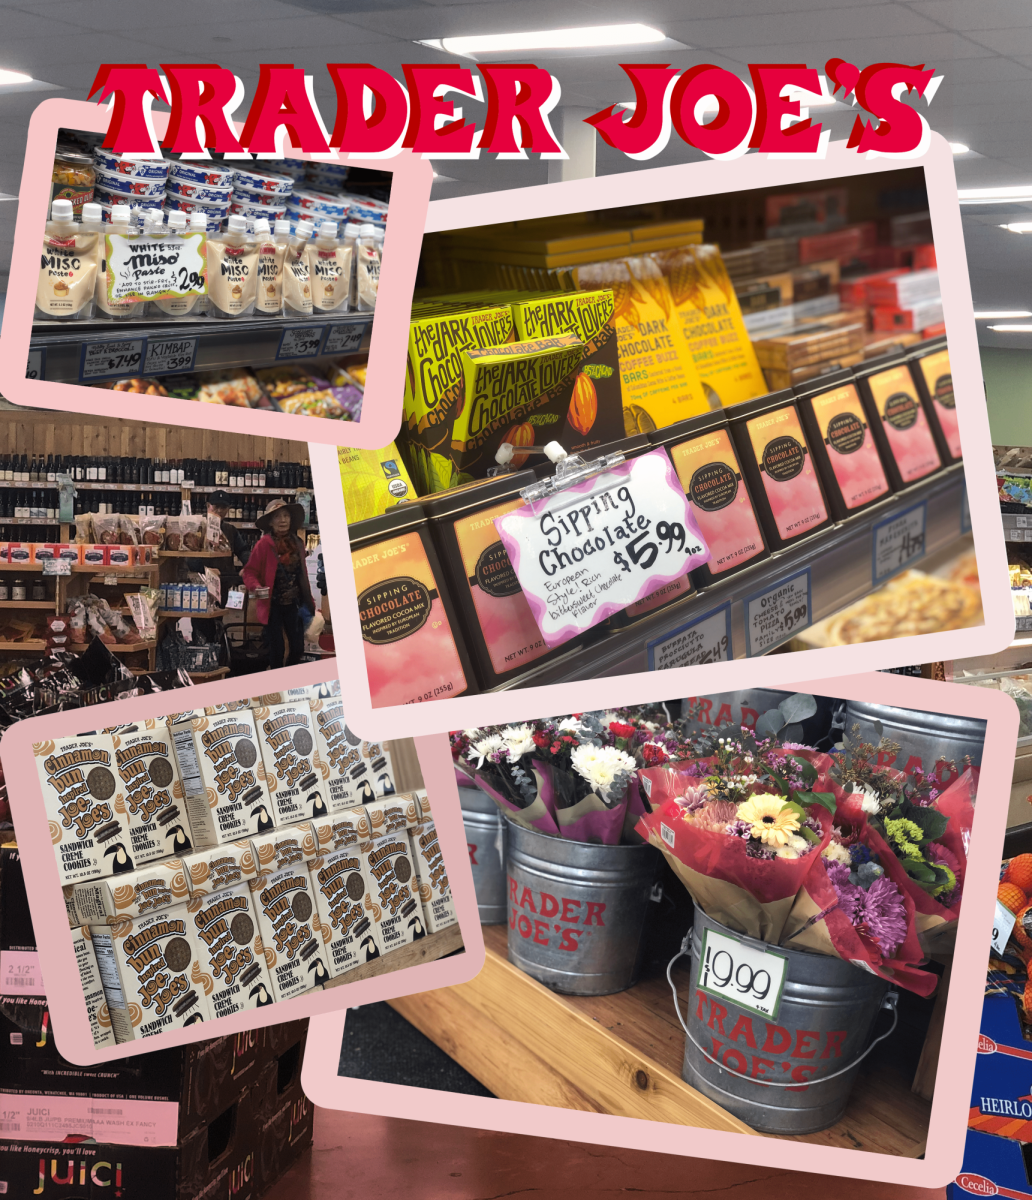 Trader+Joe%E2%80%99s+provides+the+best+customer+experience+by+far%2C+from+their+employees+to+the+constant+cycle+of+new+products.+They+make+grocery+shopping+something+to+look+forward+to%2C+which+is+a+unique+experience+among+stores.